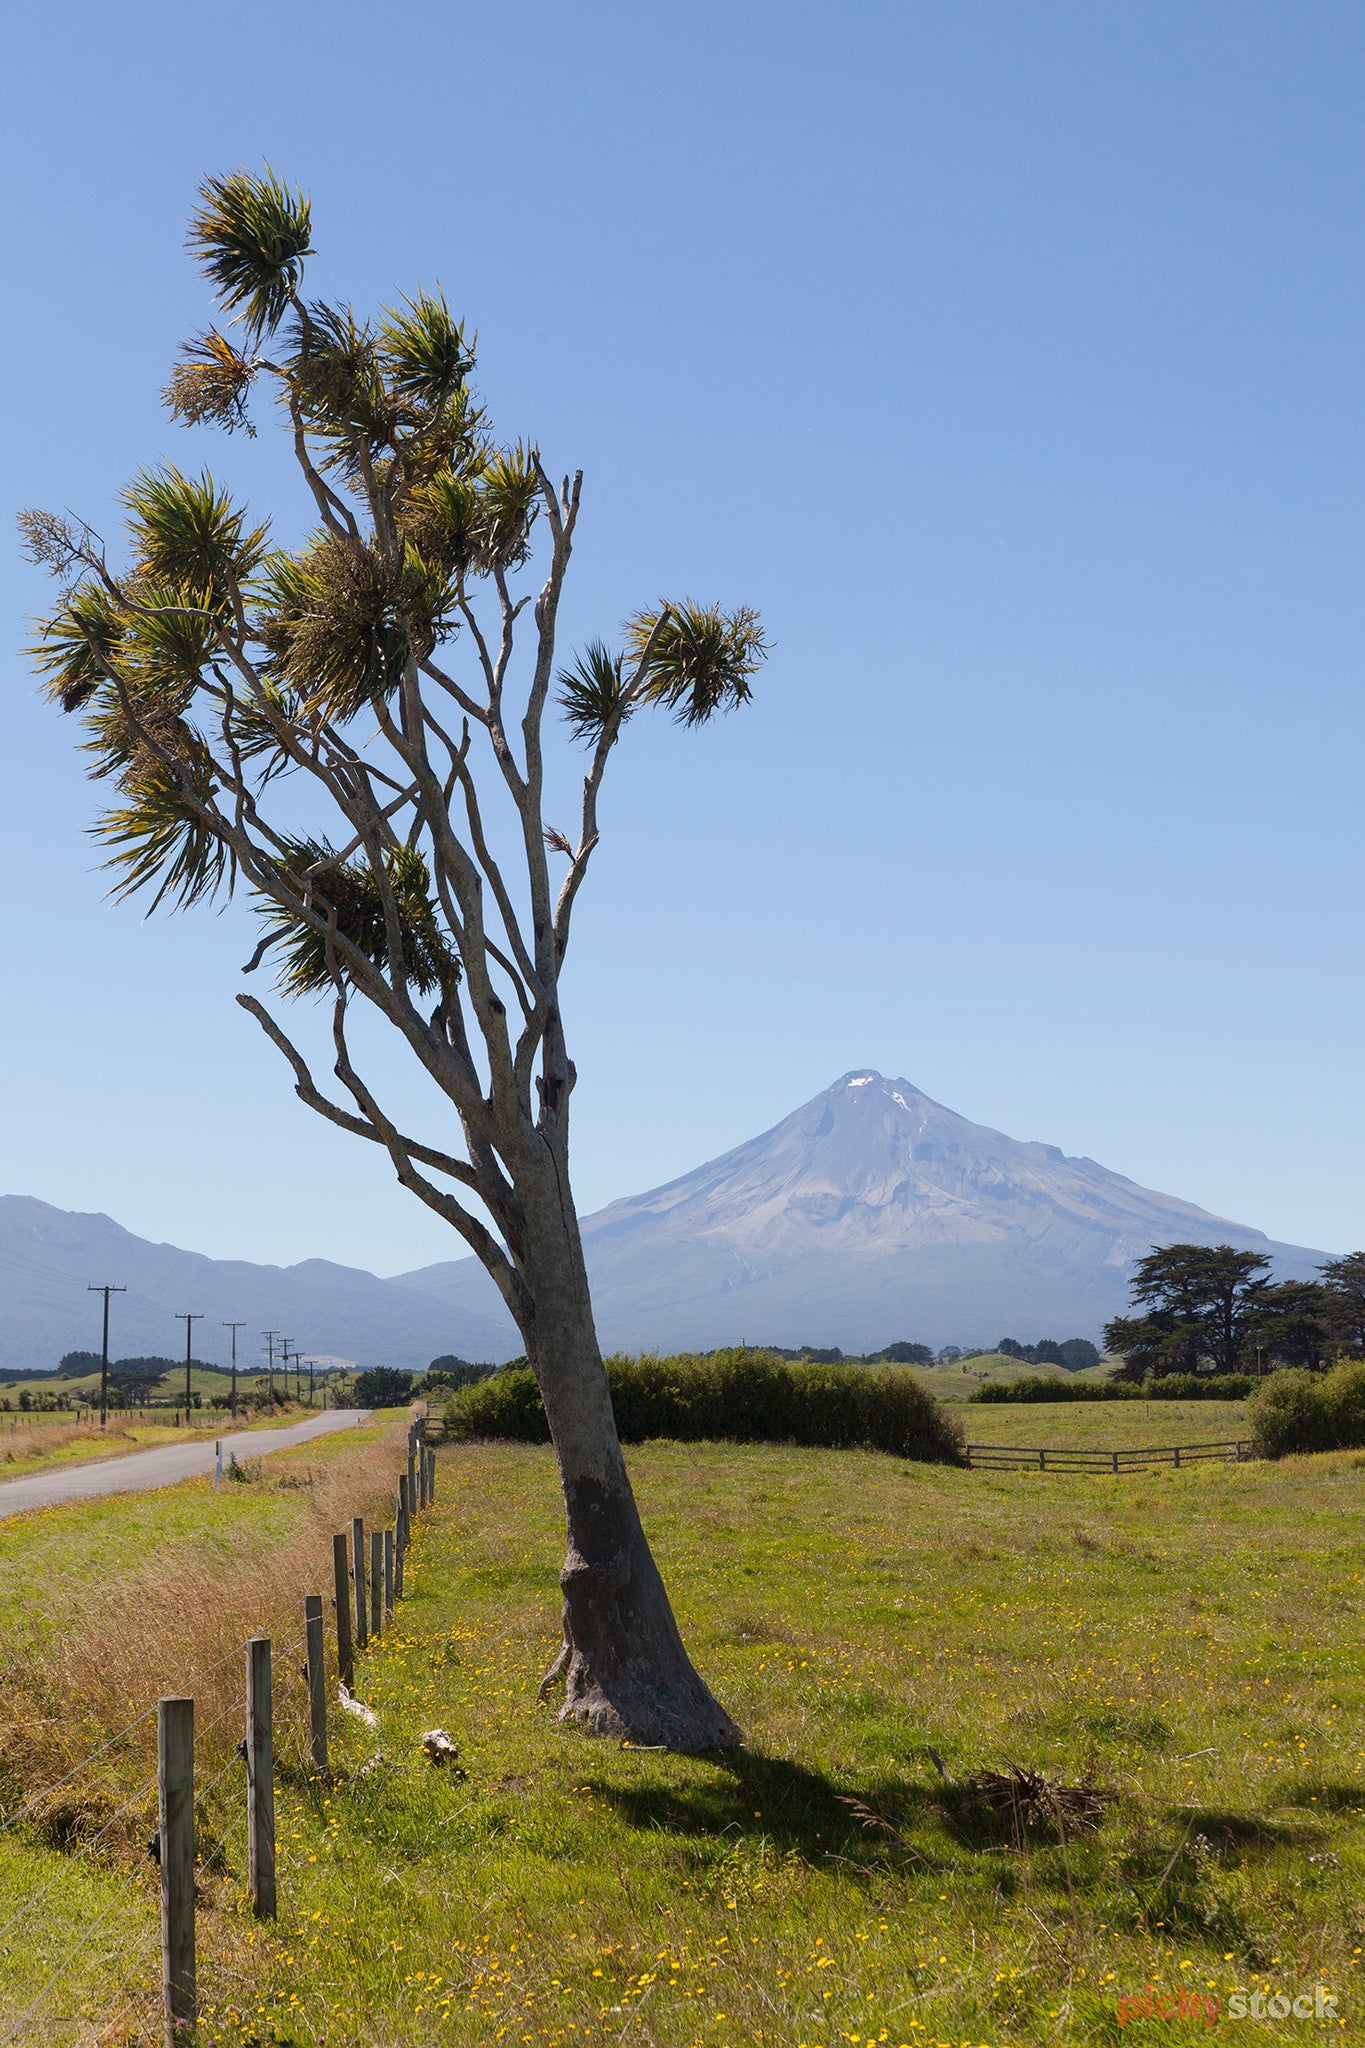 Cabbage tree sitting in a farm paddock, with Mt Taranaki in the background on a blue day